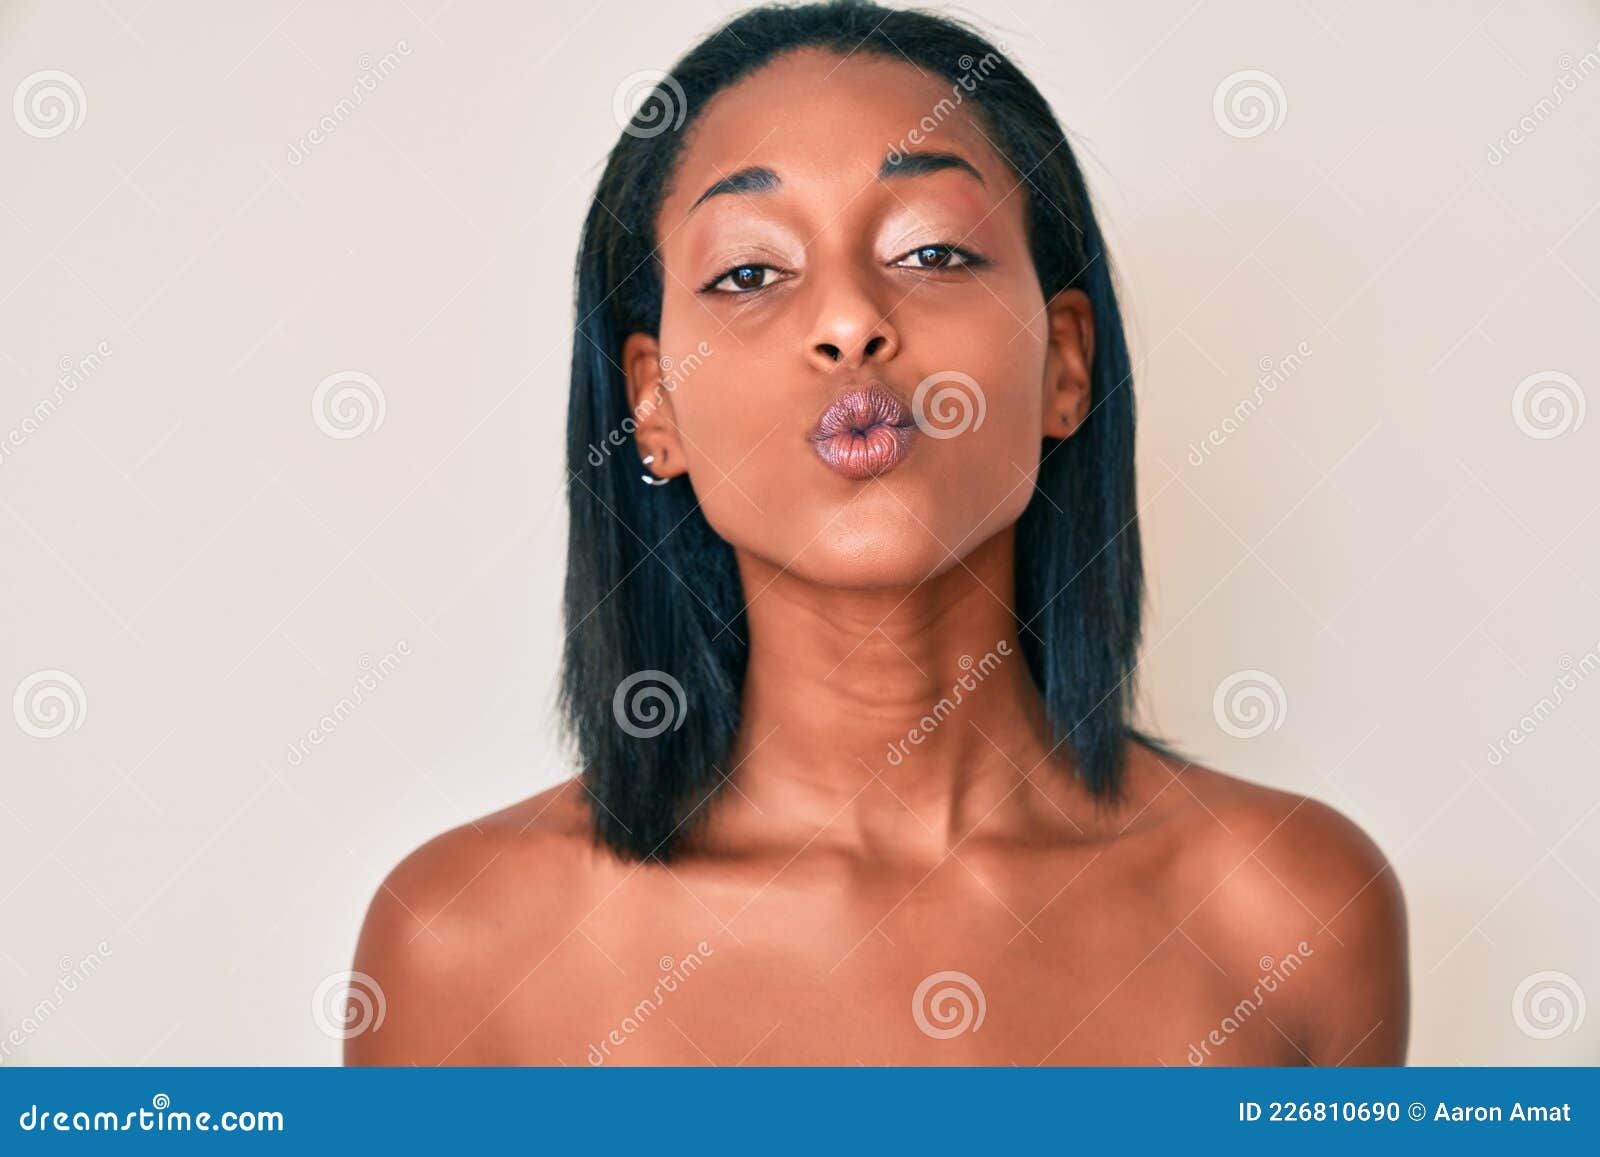 Sexy Barely Legal Black Girls - Young African American Woman Standing Topless Showing Skin Looking at the  Camera Blowing a Kiss Being Lovely and Stock Photo - Image of face,  emotion: 226810690